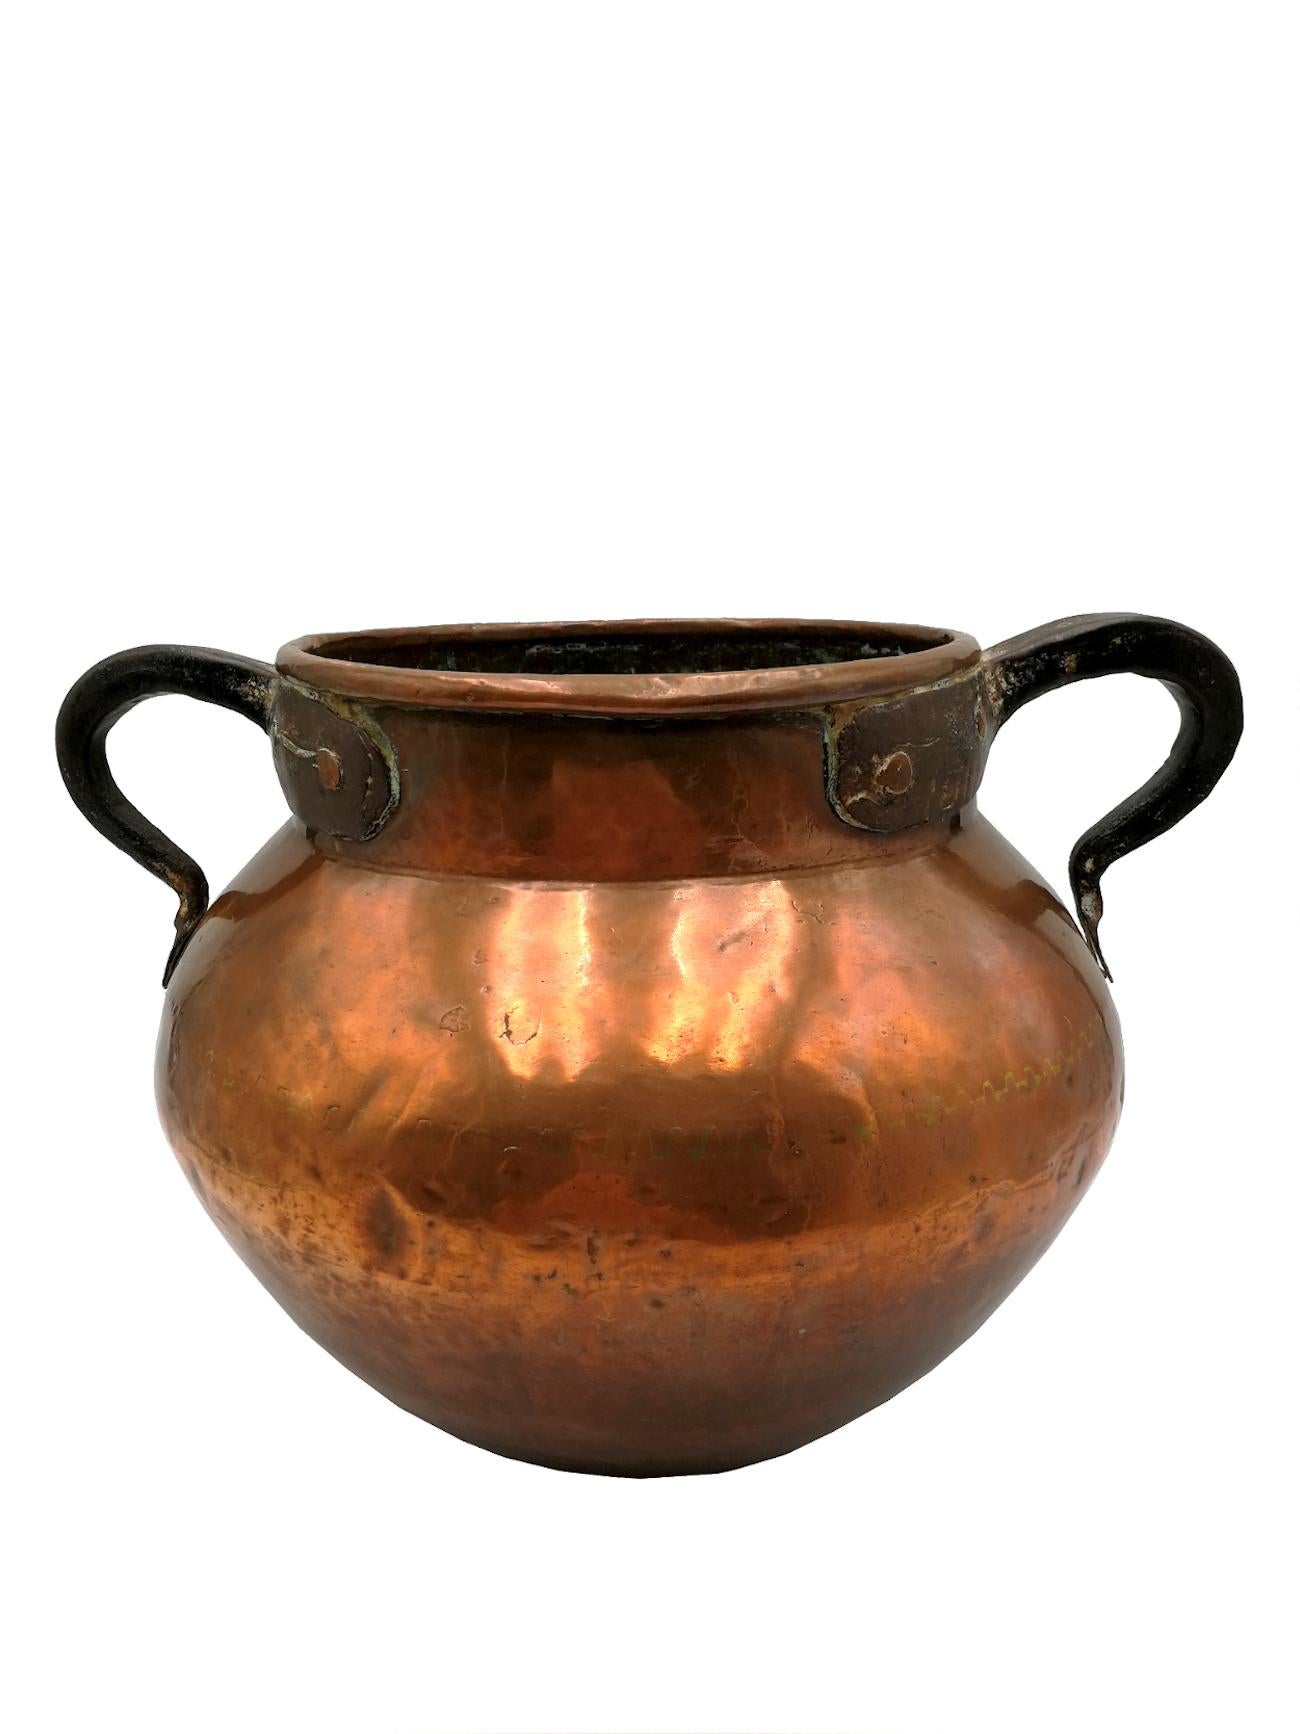 Beautiful 19th century handmade copper cauldron. This cauldron is made of several pieces of
copper that have been joined together according to the ancestral traditions of boiler making and
that, as they are visible, give it a special charm. The